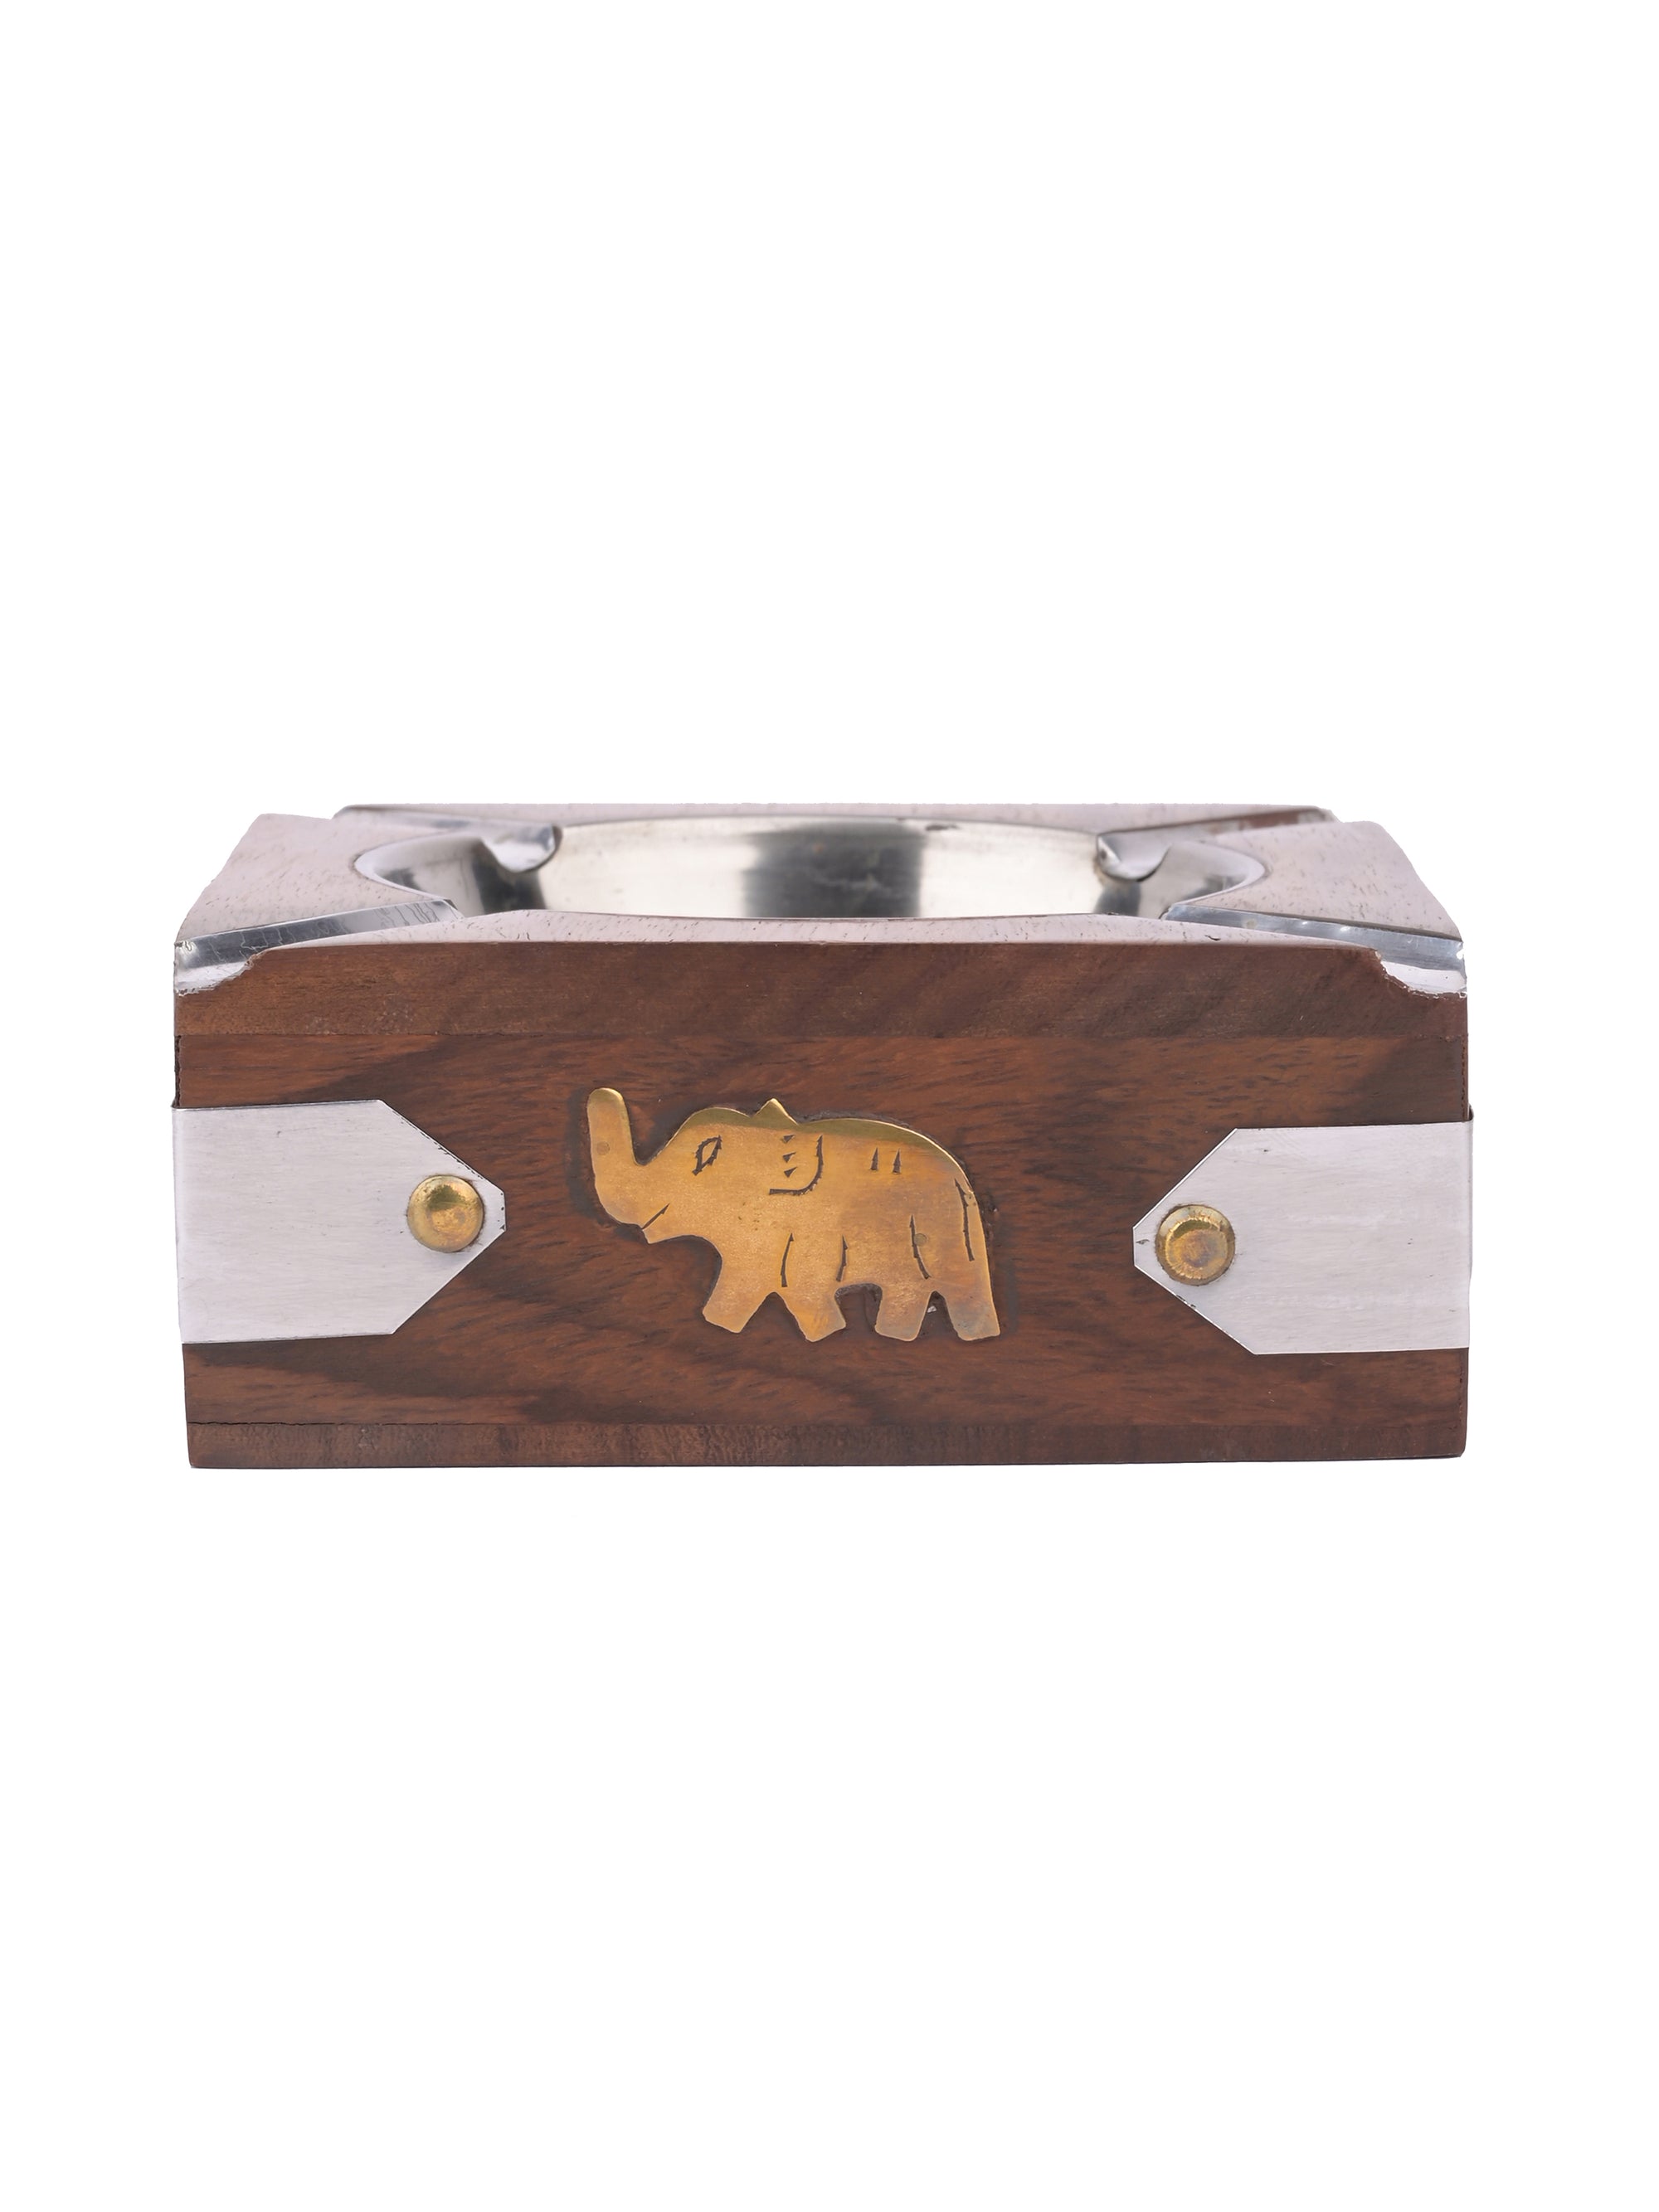 Square Wooden Ashtray with Metal Top and Elephant design on the side - The Heritage Artifacts